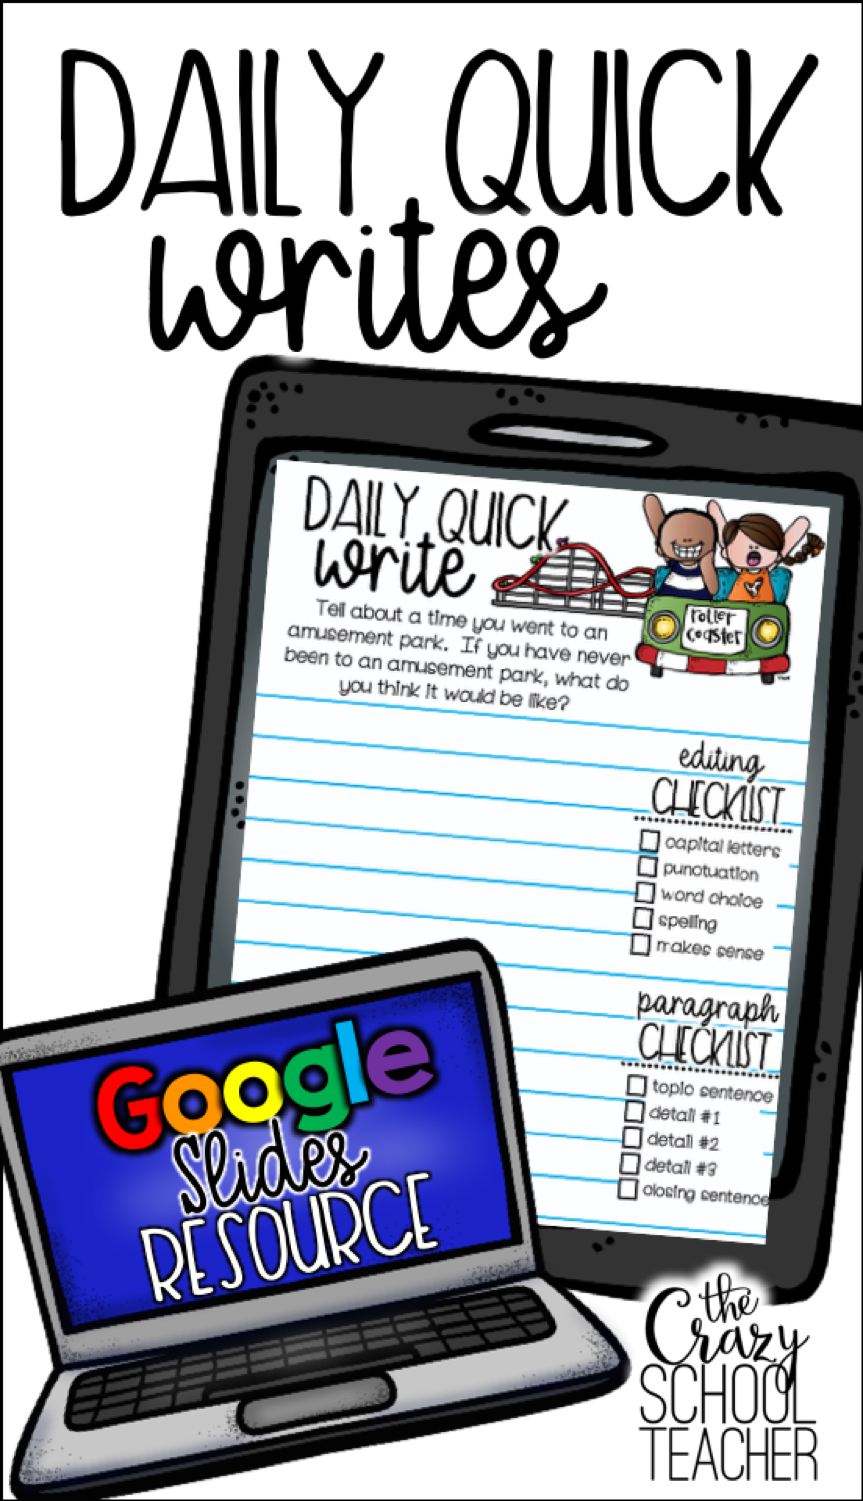 Digital Daily Quick Writing Prompts to use with Google.